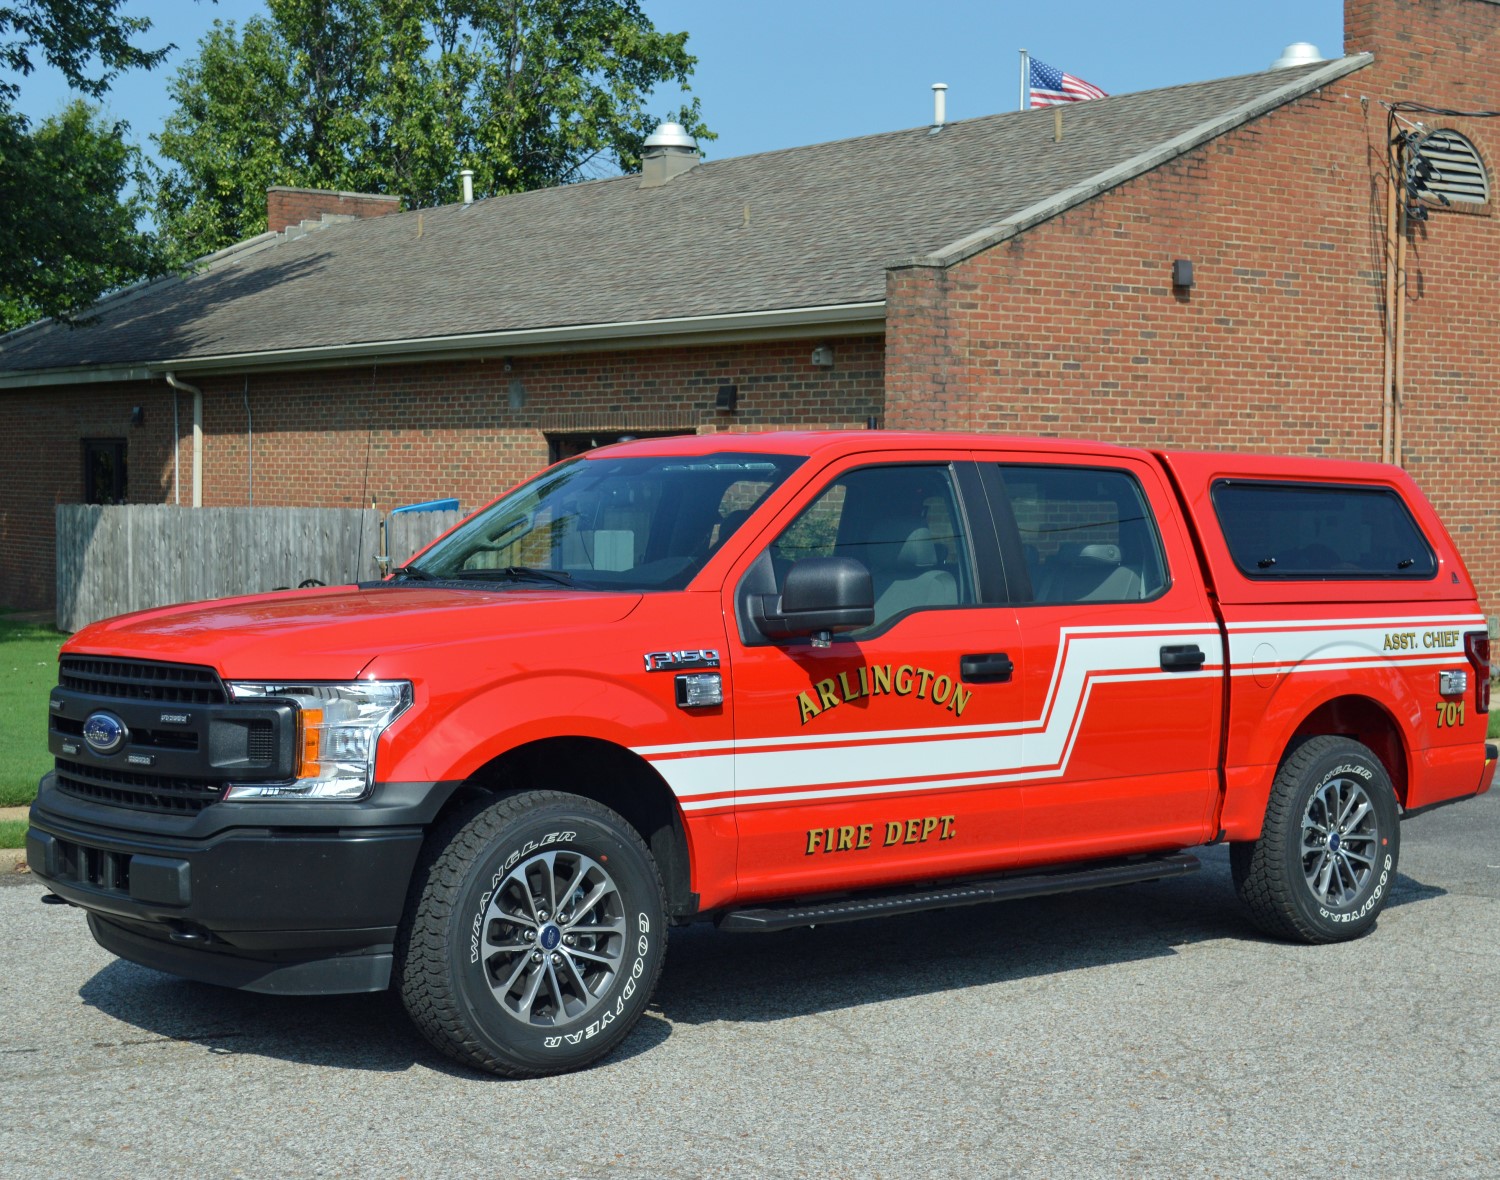 Red fire pickup truck parked in front of a brick building